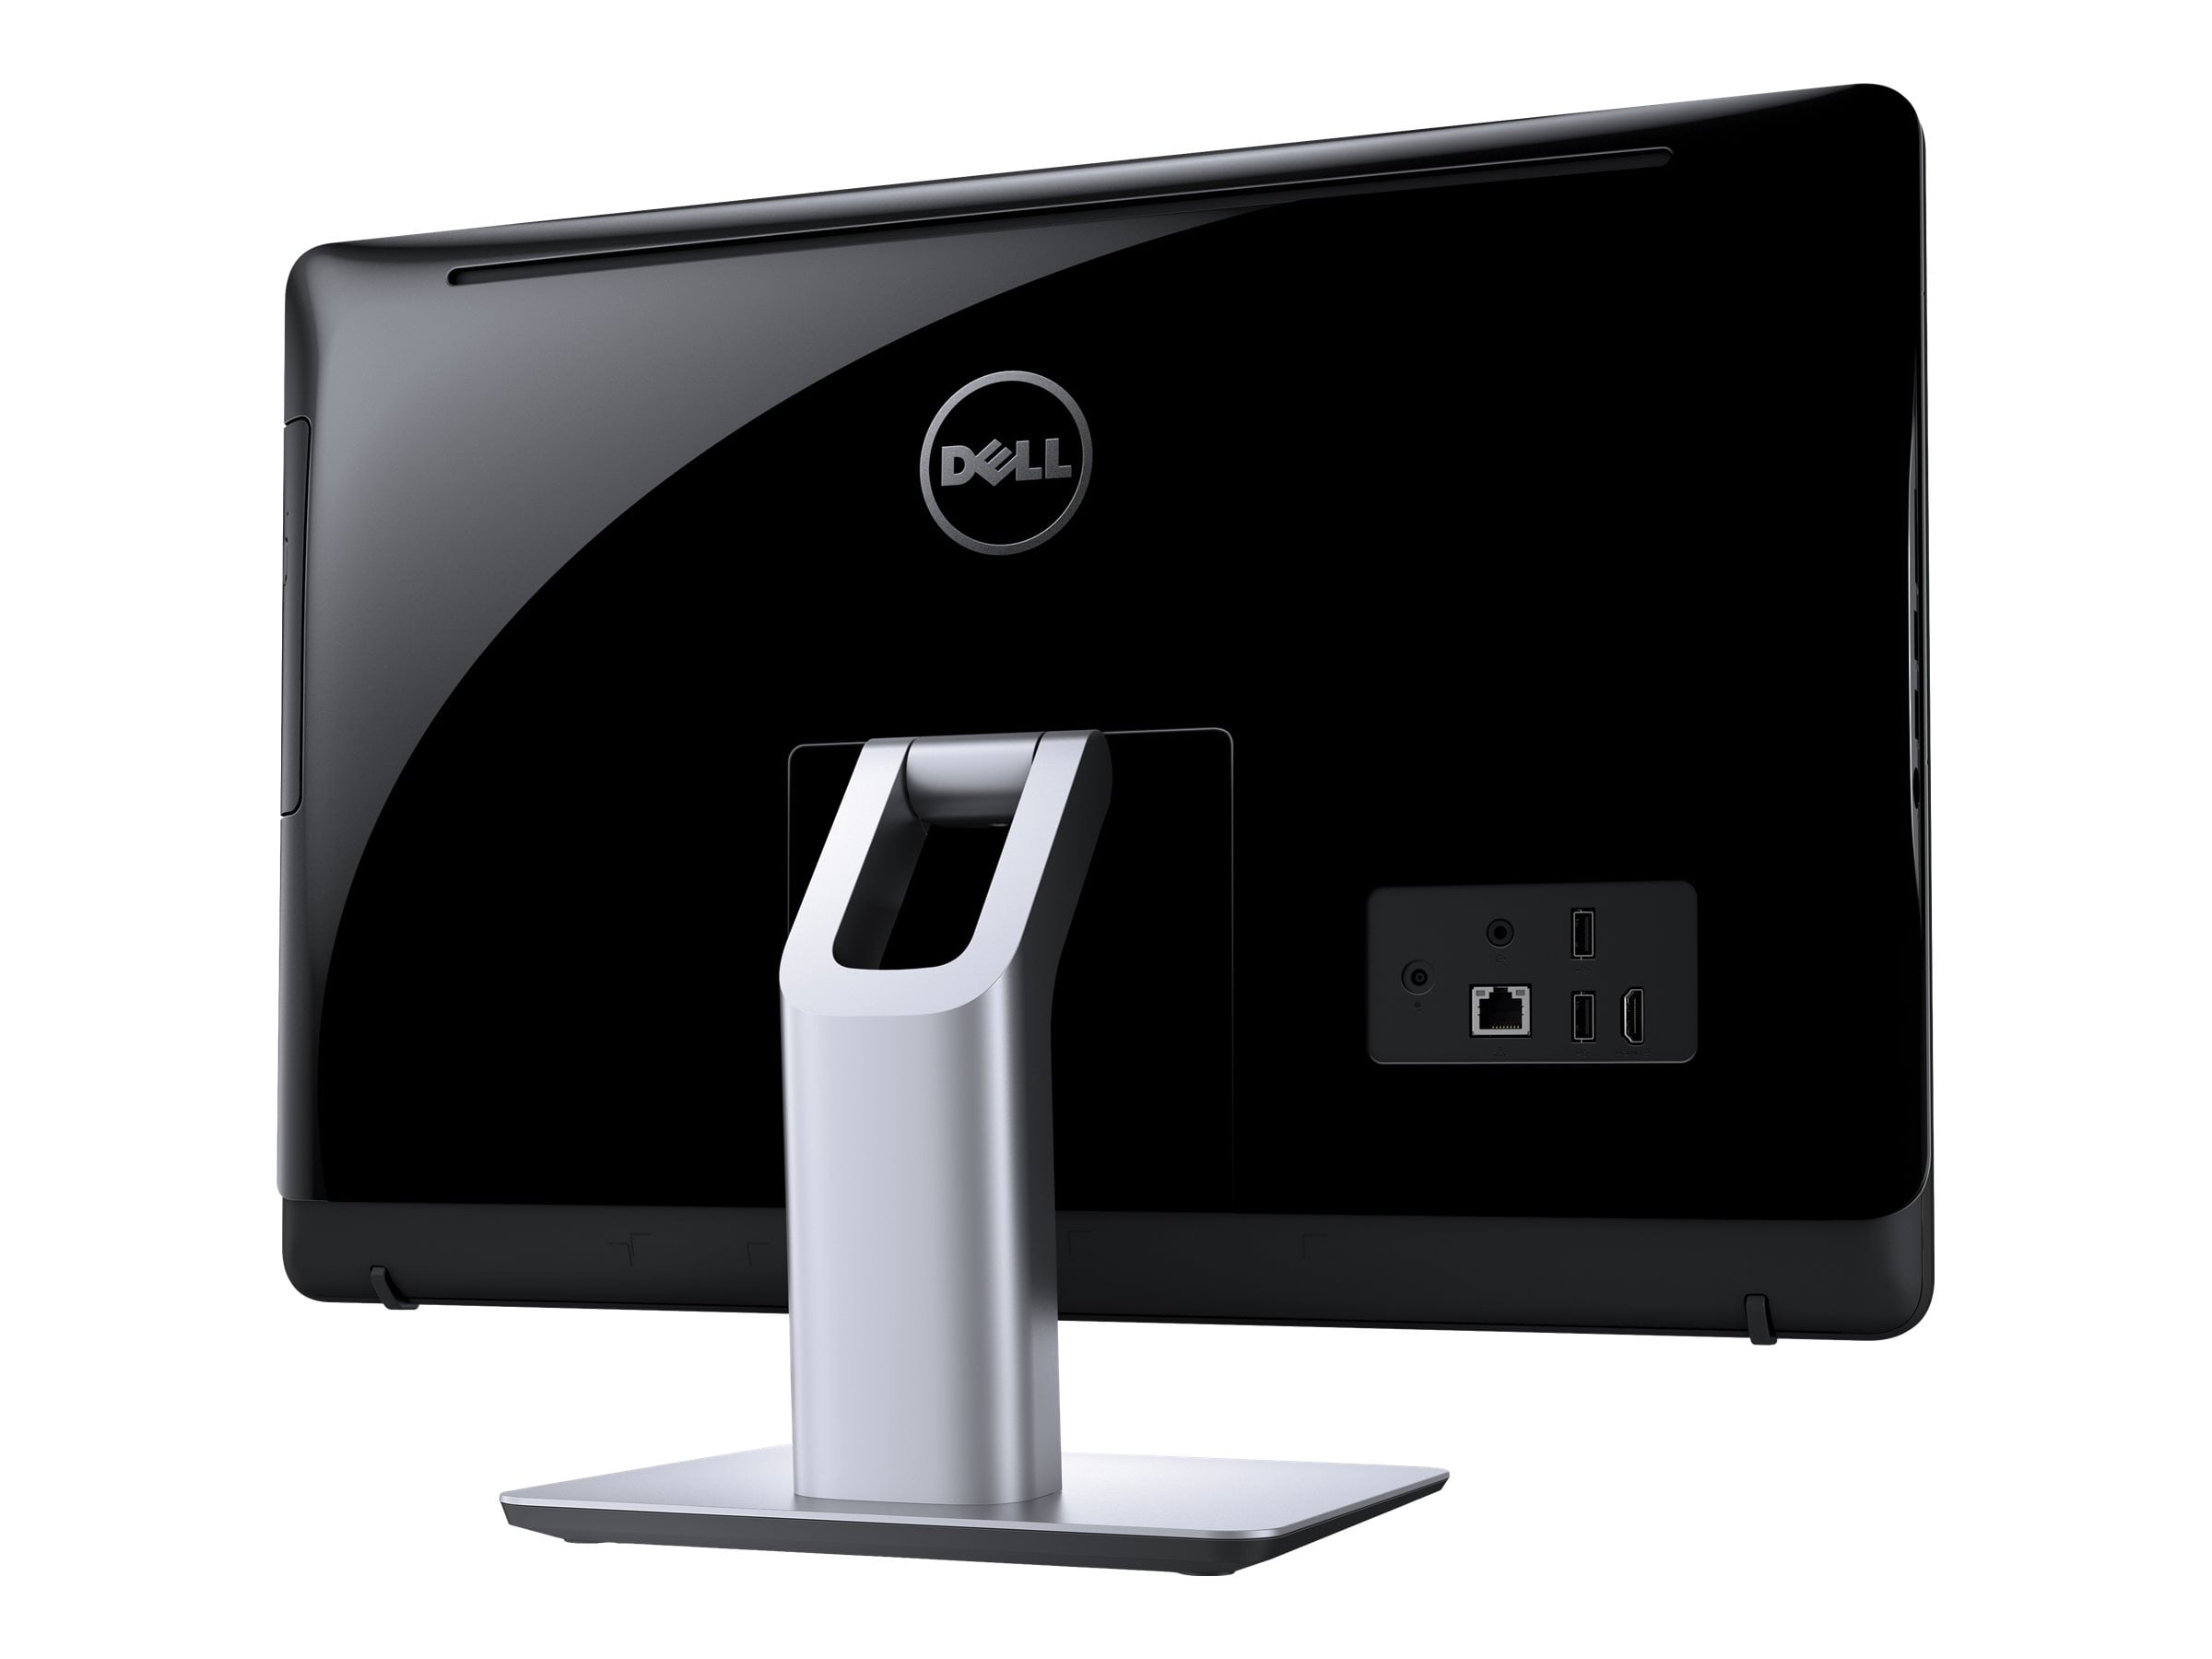 Dell Inspiron 3263 - All-in-one - Core i3 6100U / 2.3 GHz - RAM 6 GB - HDD  1 TB - DVD-Writer - HD Graphics 520 - GigE - WLAN: 802.11a/b/g/n/ac, 